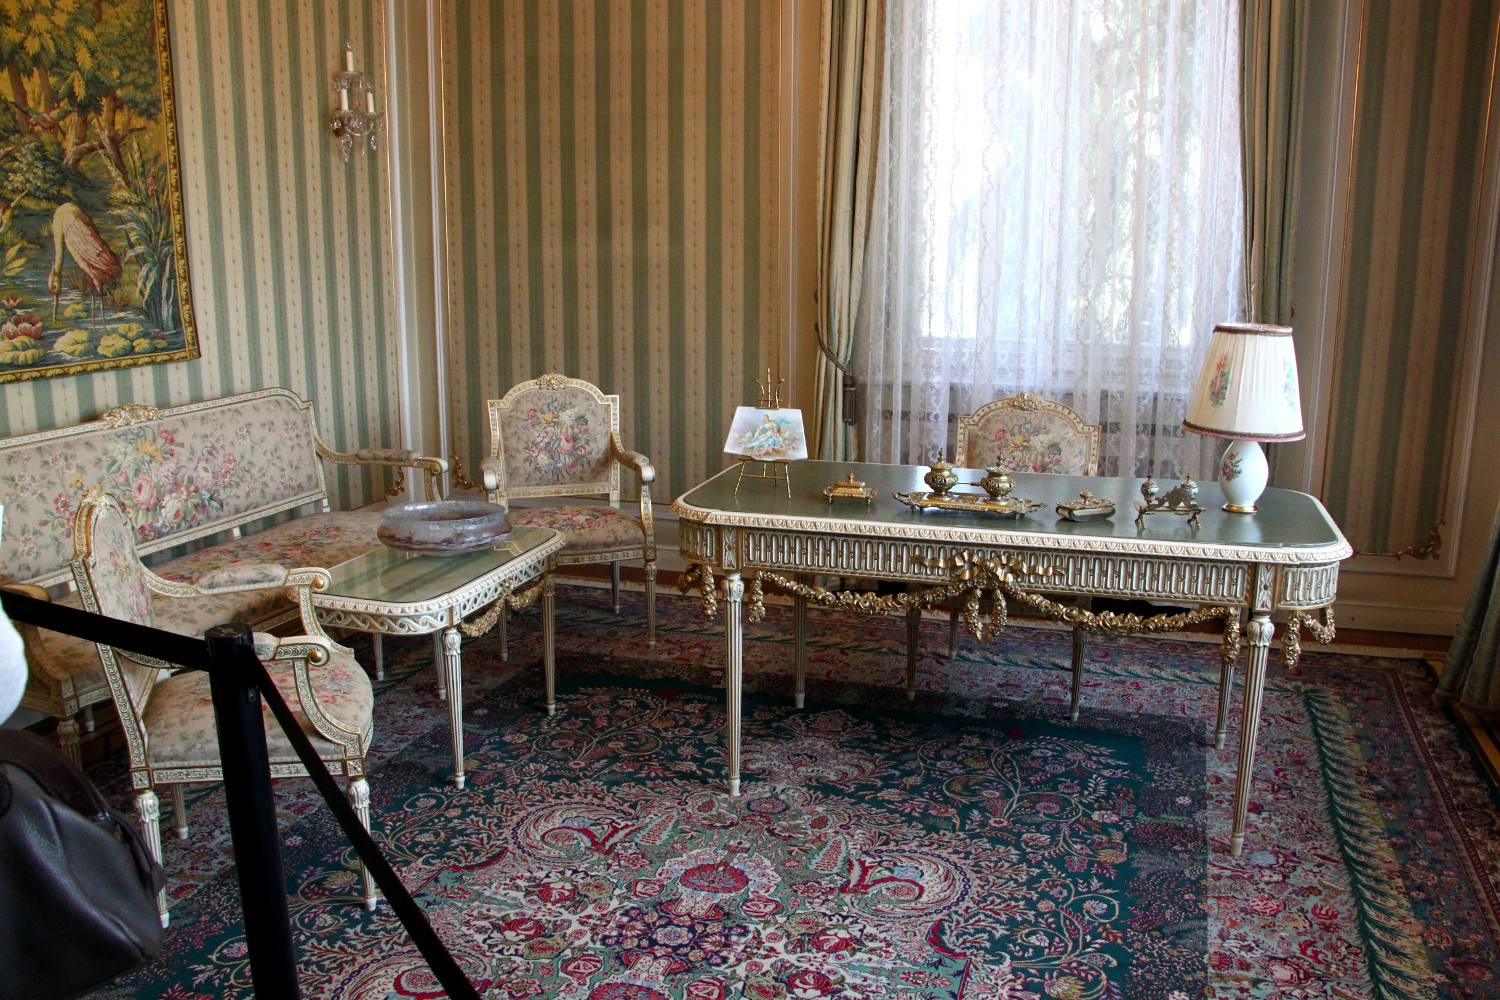 Primaverii (Spring) Palace, Ceausescu’s private residence - Zoe Ceausescu's office